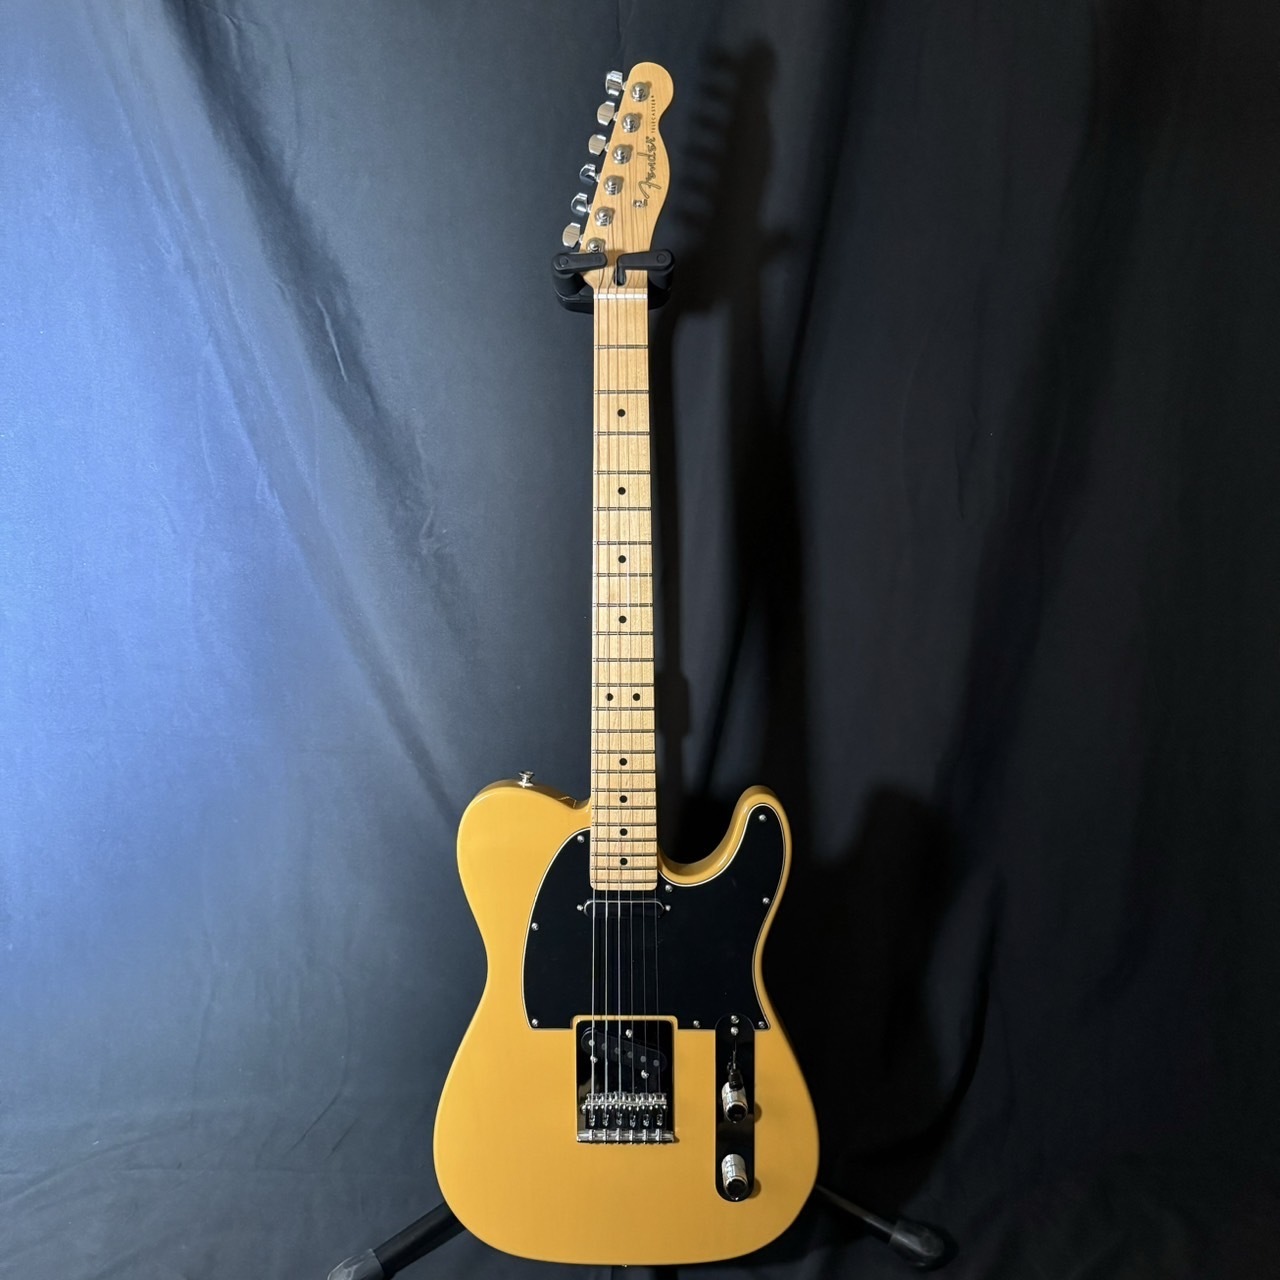 Fender Player Telecaster Butterscotch Blonde エレキギター 